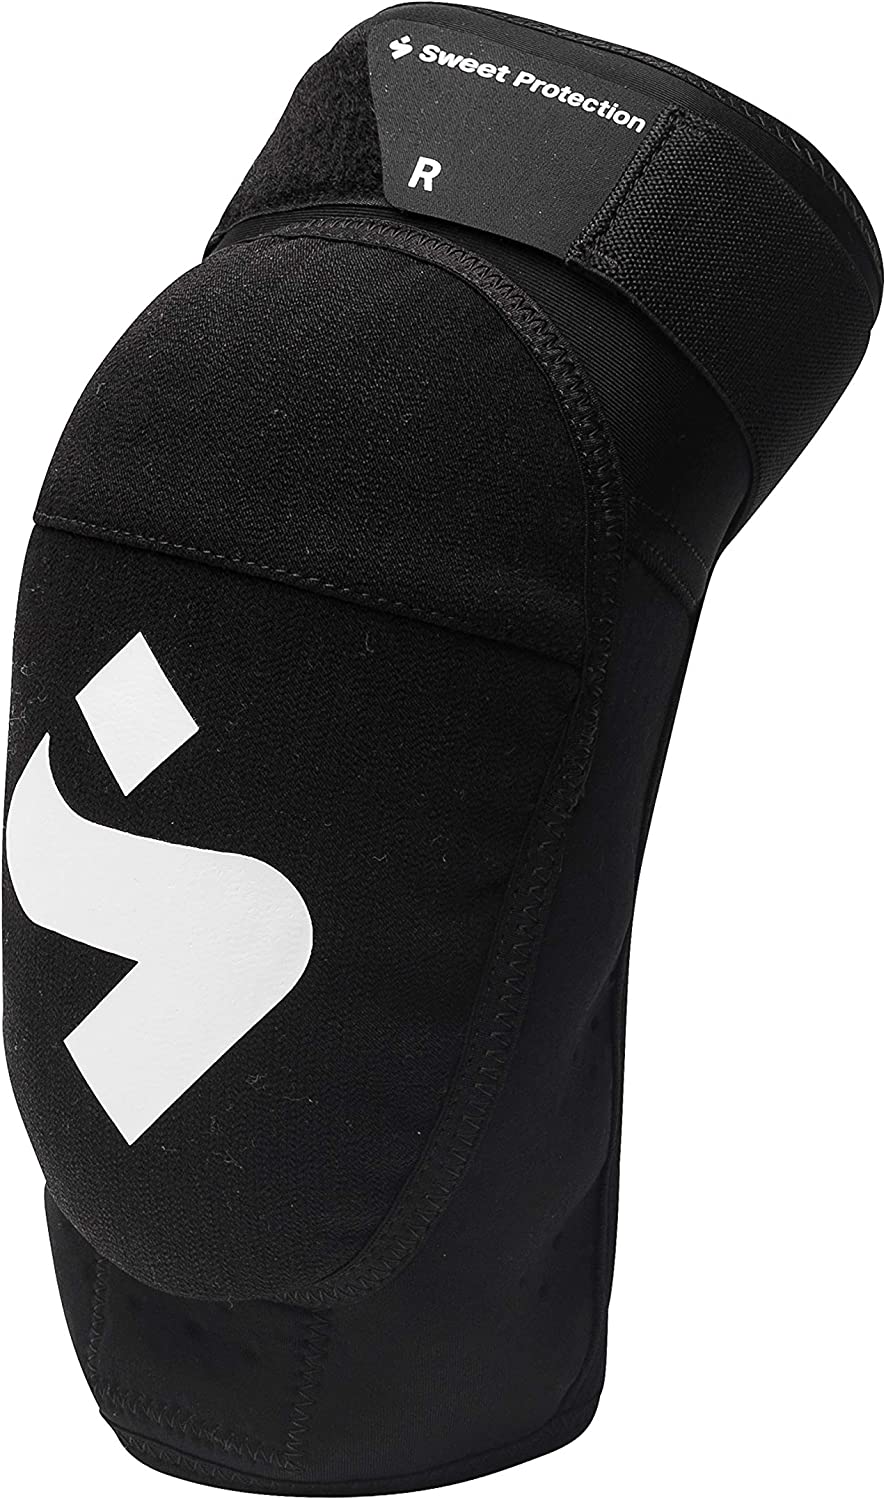 Sweet Protection knee pads